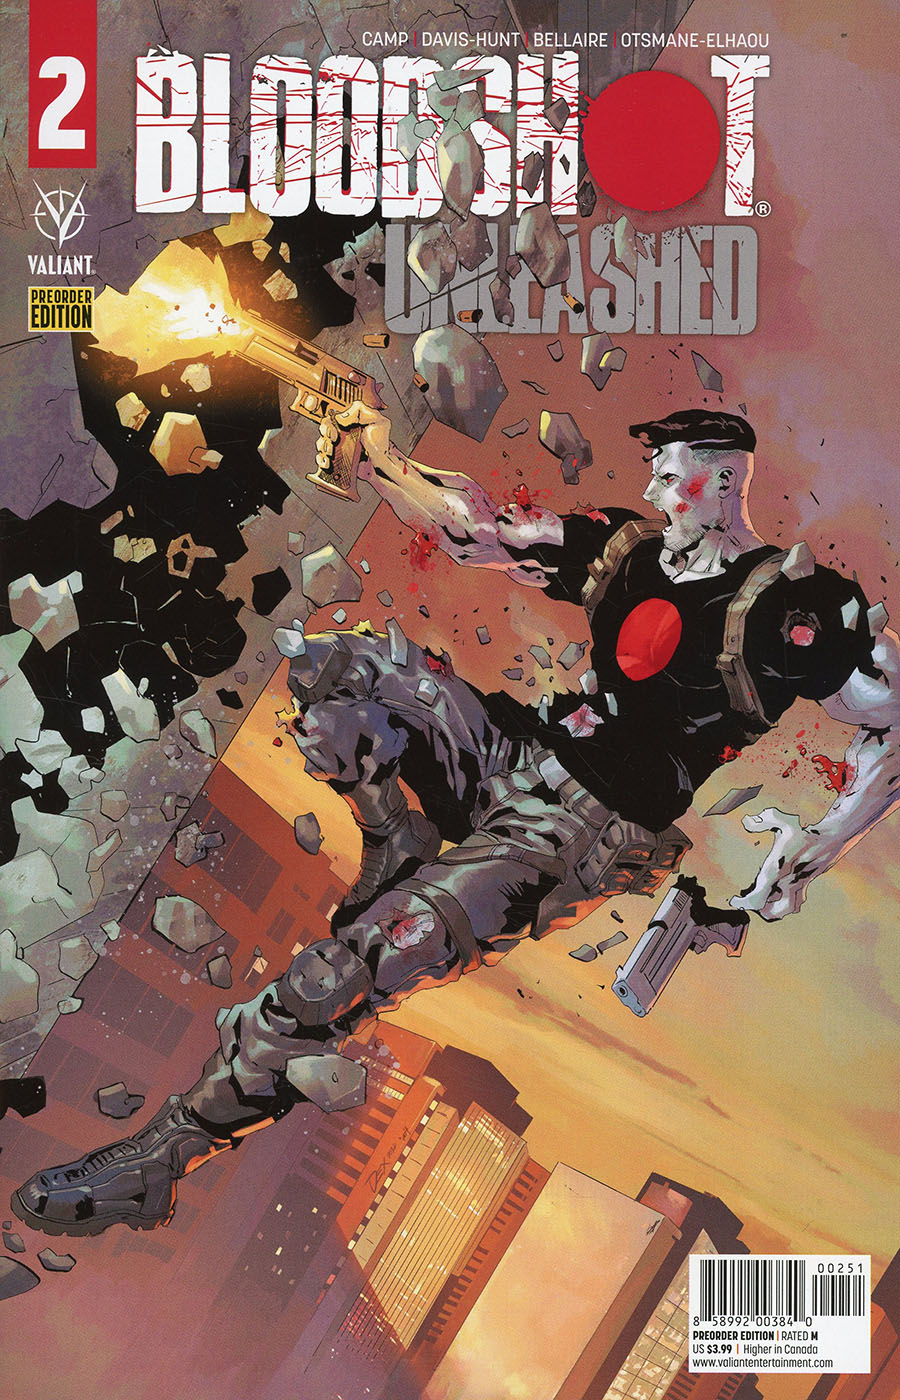 Bloodshot Unleashed #2 Cover E Variant Dexter Soy Hard To Kill Pre-Order Edition